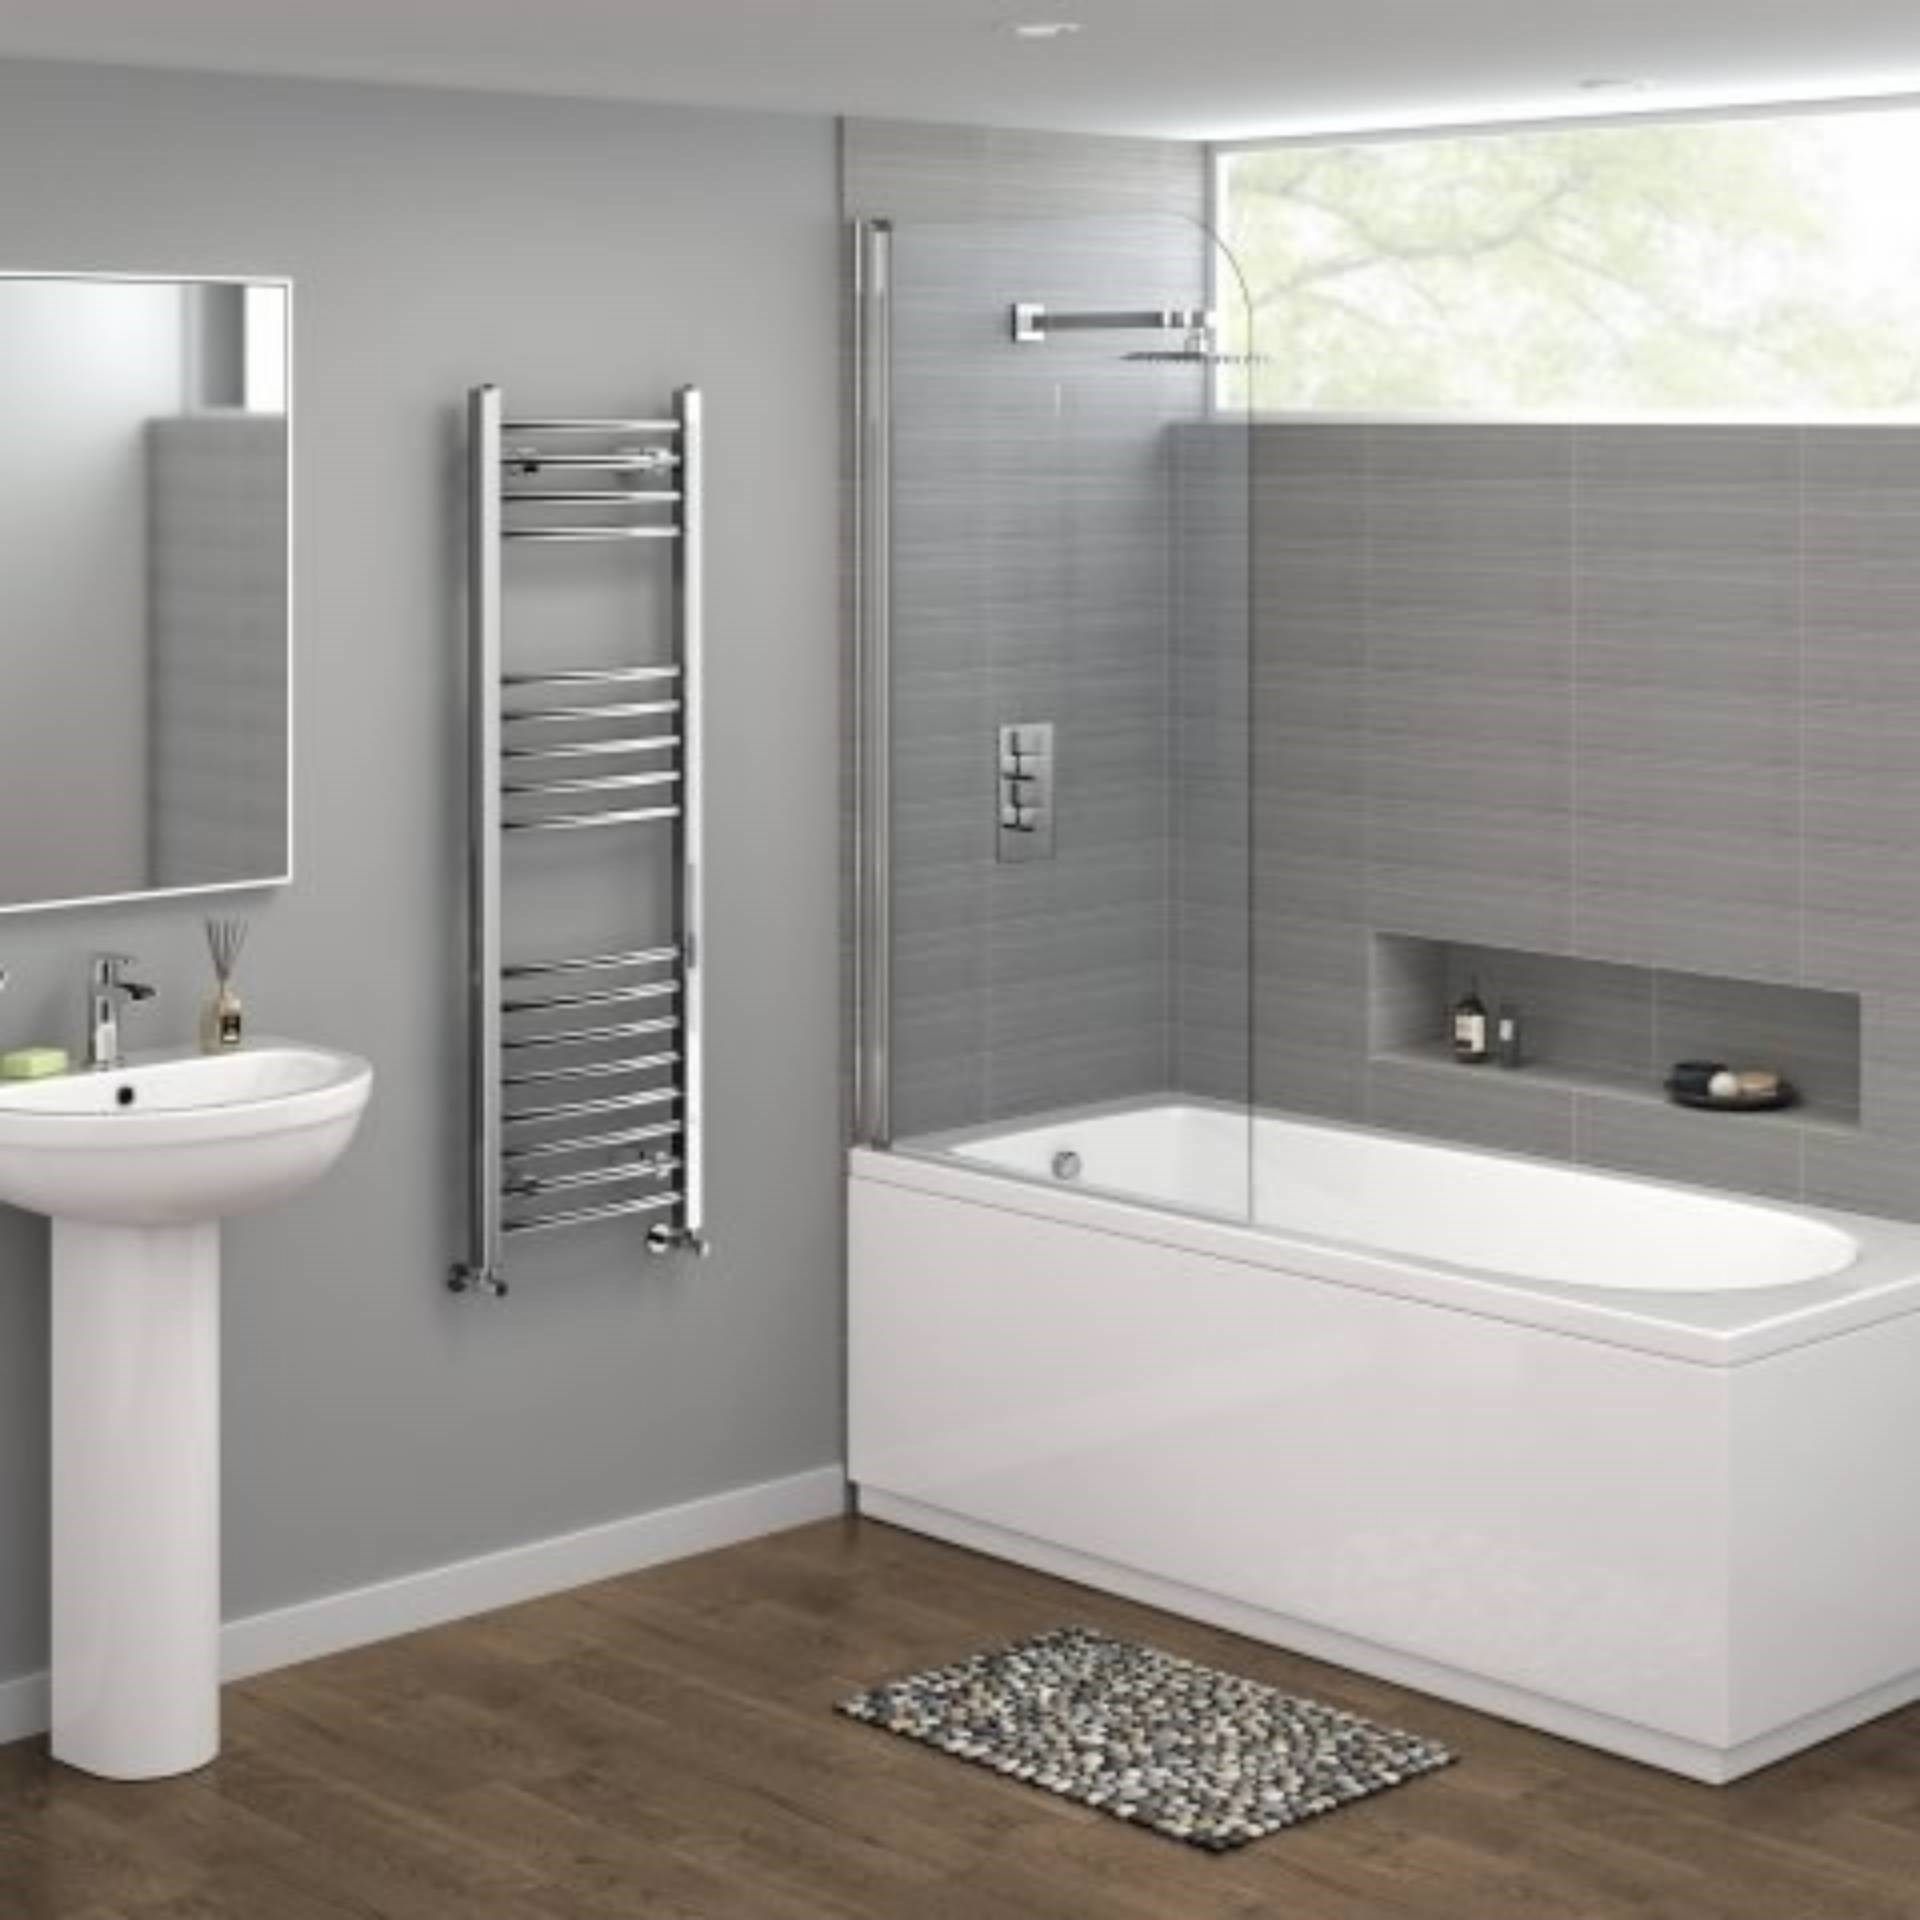 NEW & BOXED 1200x400mm - 20mm Tubes - Chrome Curved Rail Ladder Towel Radiator. NC1200400.Our - Image 2 of 2